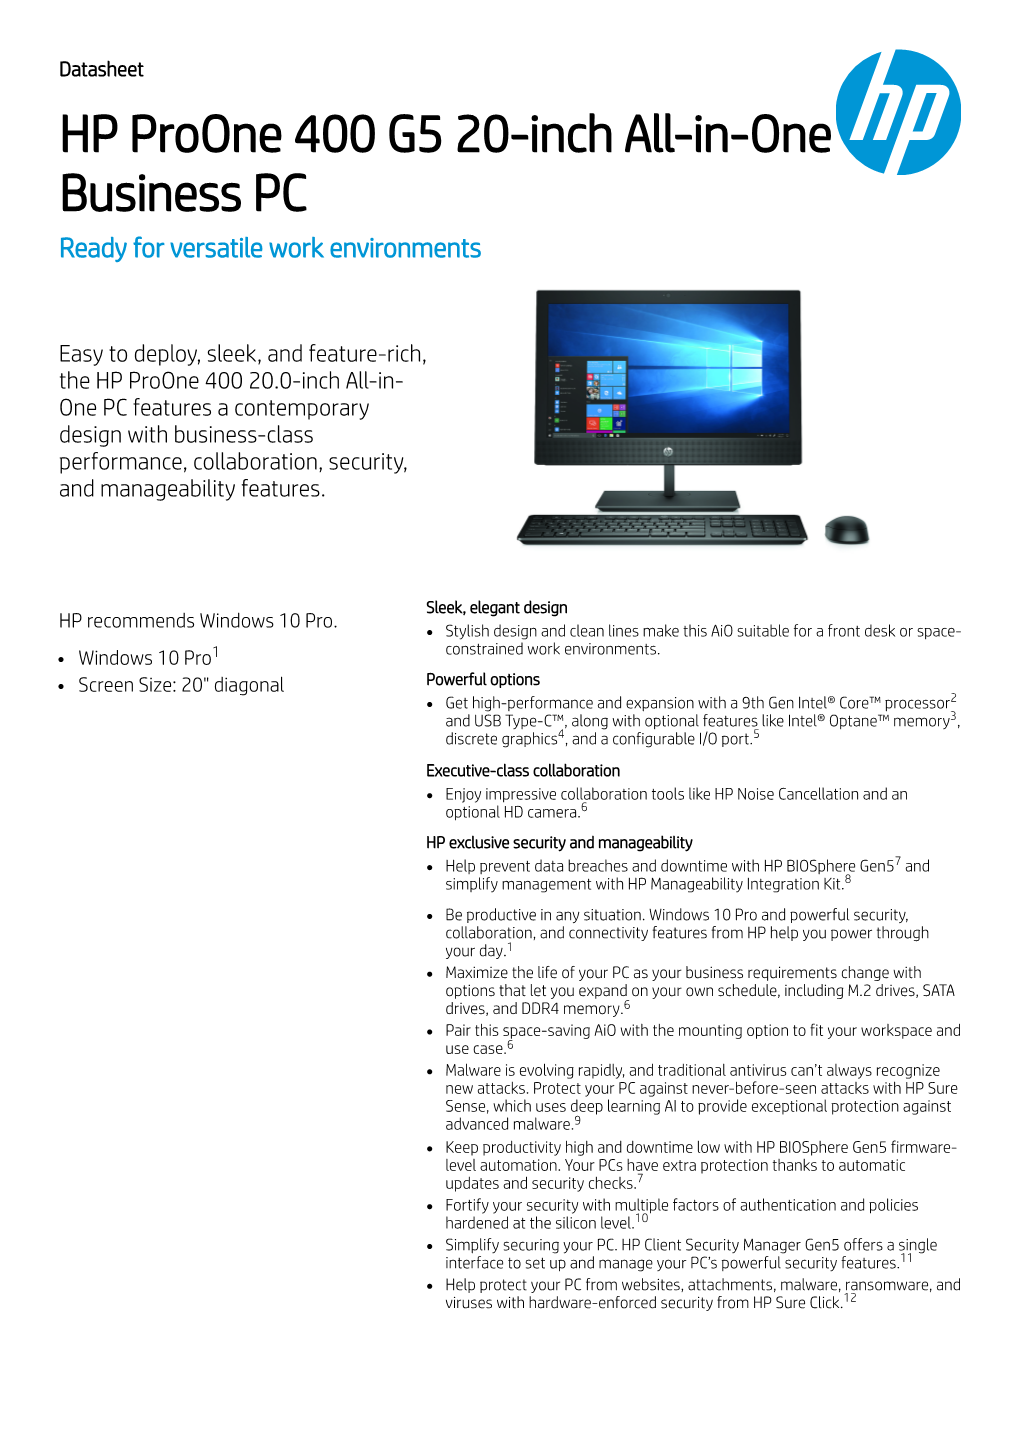 HP Proone 400 G5 20-Inch All-In-One Business PC Ready for Versatile Work Environments